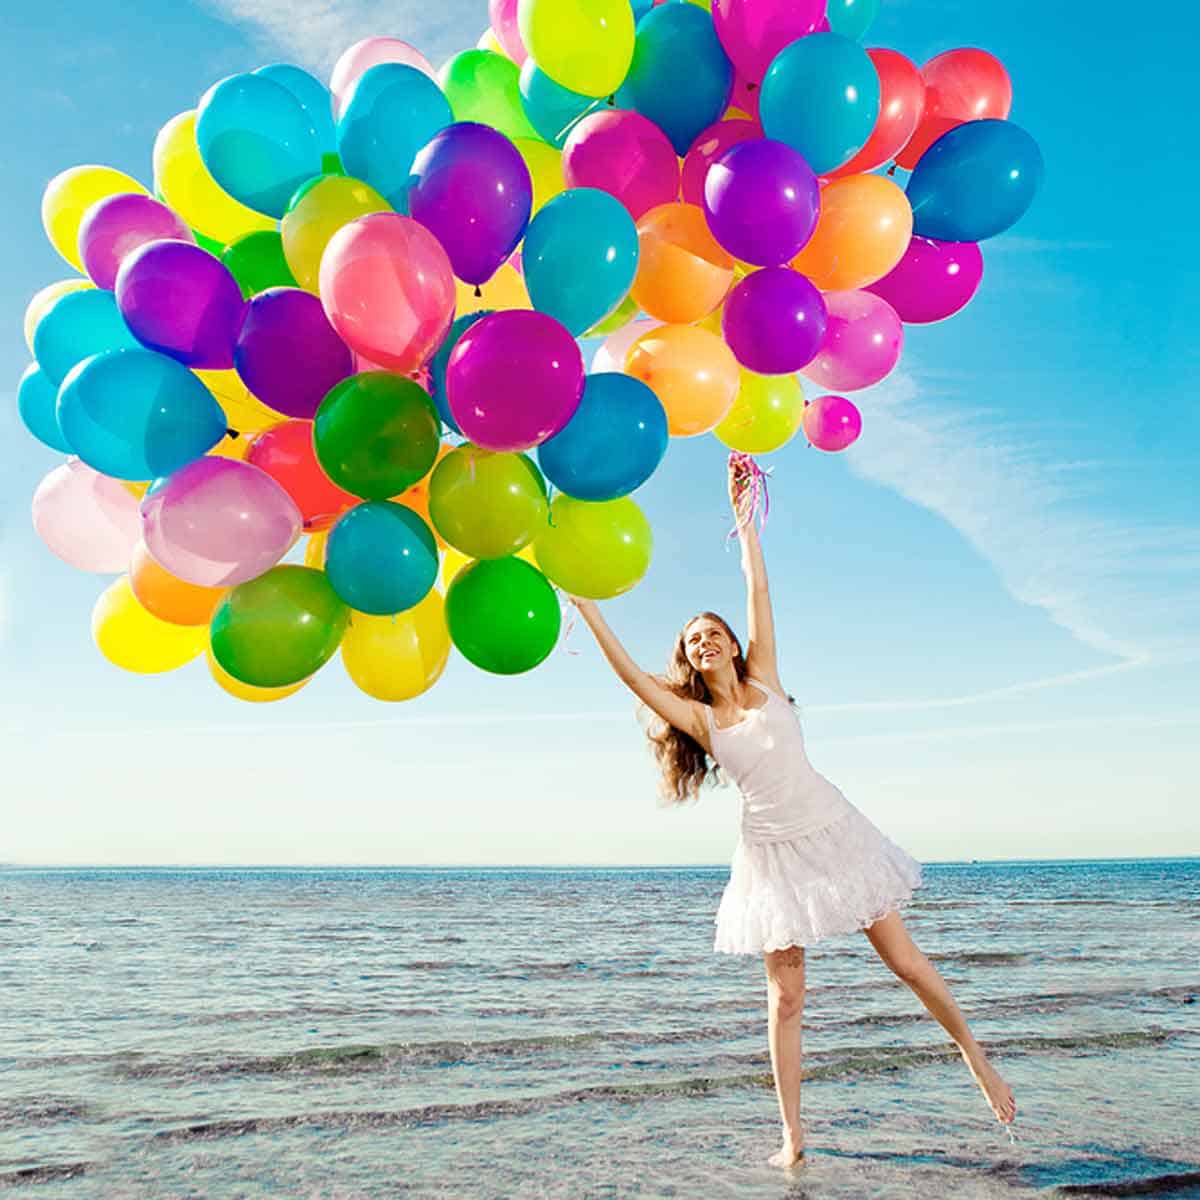 A woman holding a group of colorful balloons.